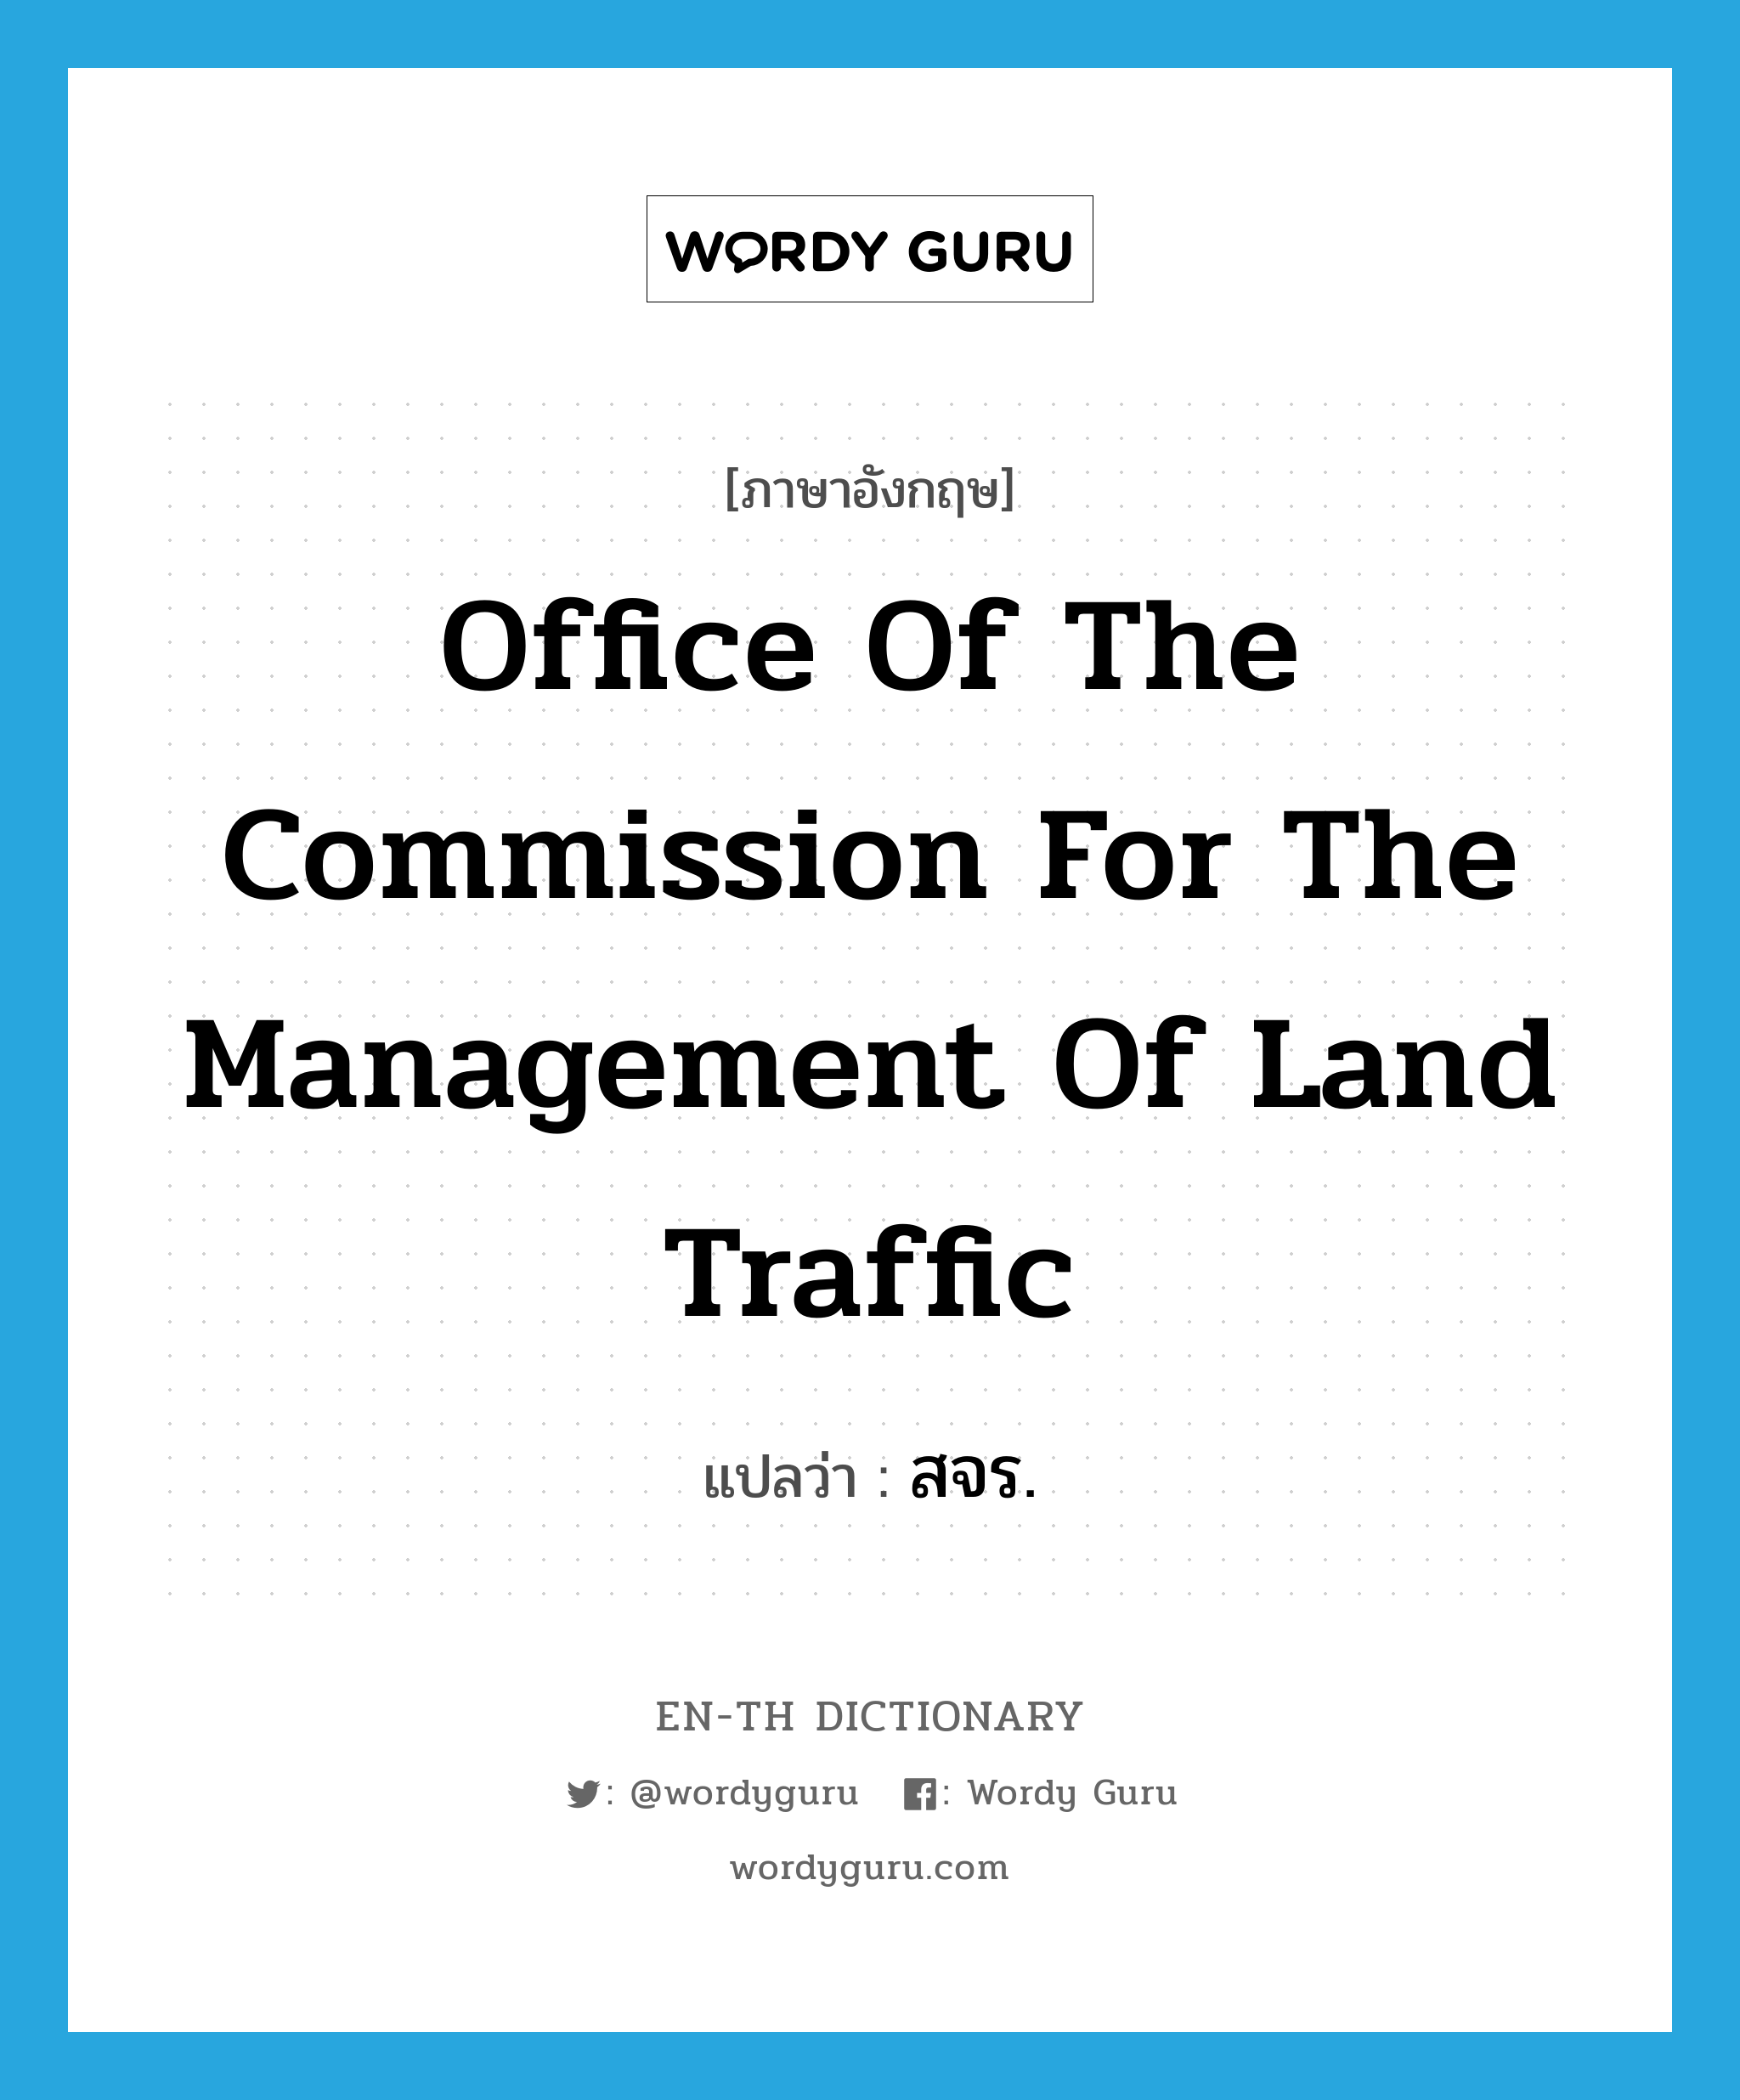 Office of the Commission for the Management of Road Traffic แปลว่า?, คำศัพท์ภาษาอังกฤษ Office of the Commission for the Management of Land Traffic แปลว่า สจร. ประเภท N หมวด N